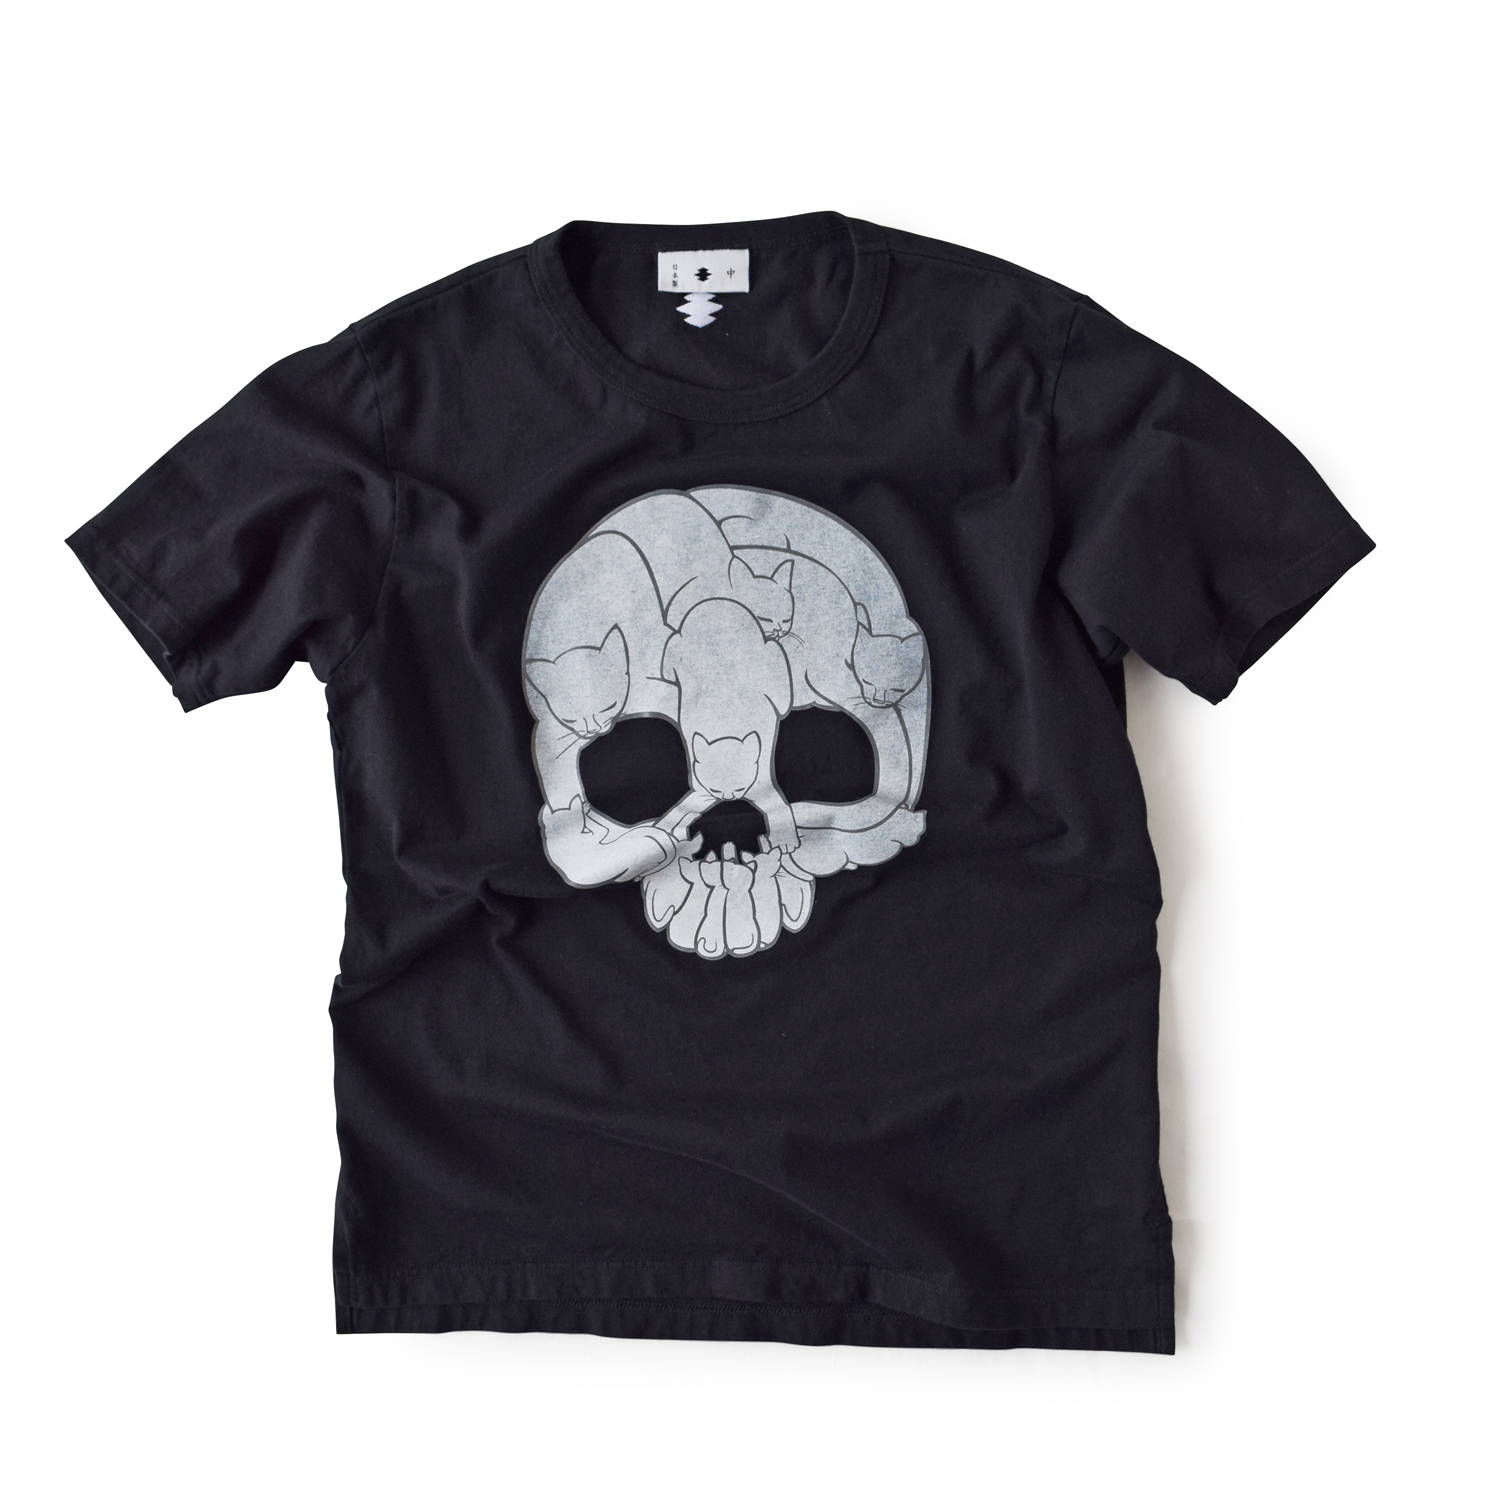 <div style="width:60px;display:inline-block;">model</div> T-shirt #84 "Gathering"<br><div style="width:60px;display:inline-block;">color</div> black<br><div style="width:60px;display:inline-block;">material</div> cotton<br><div style="width:60px;display:inline-block;">price</div> 9,000JPY(+tax)